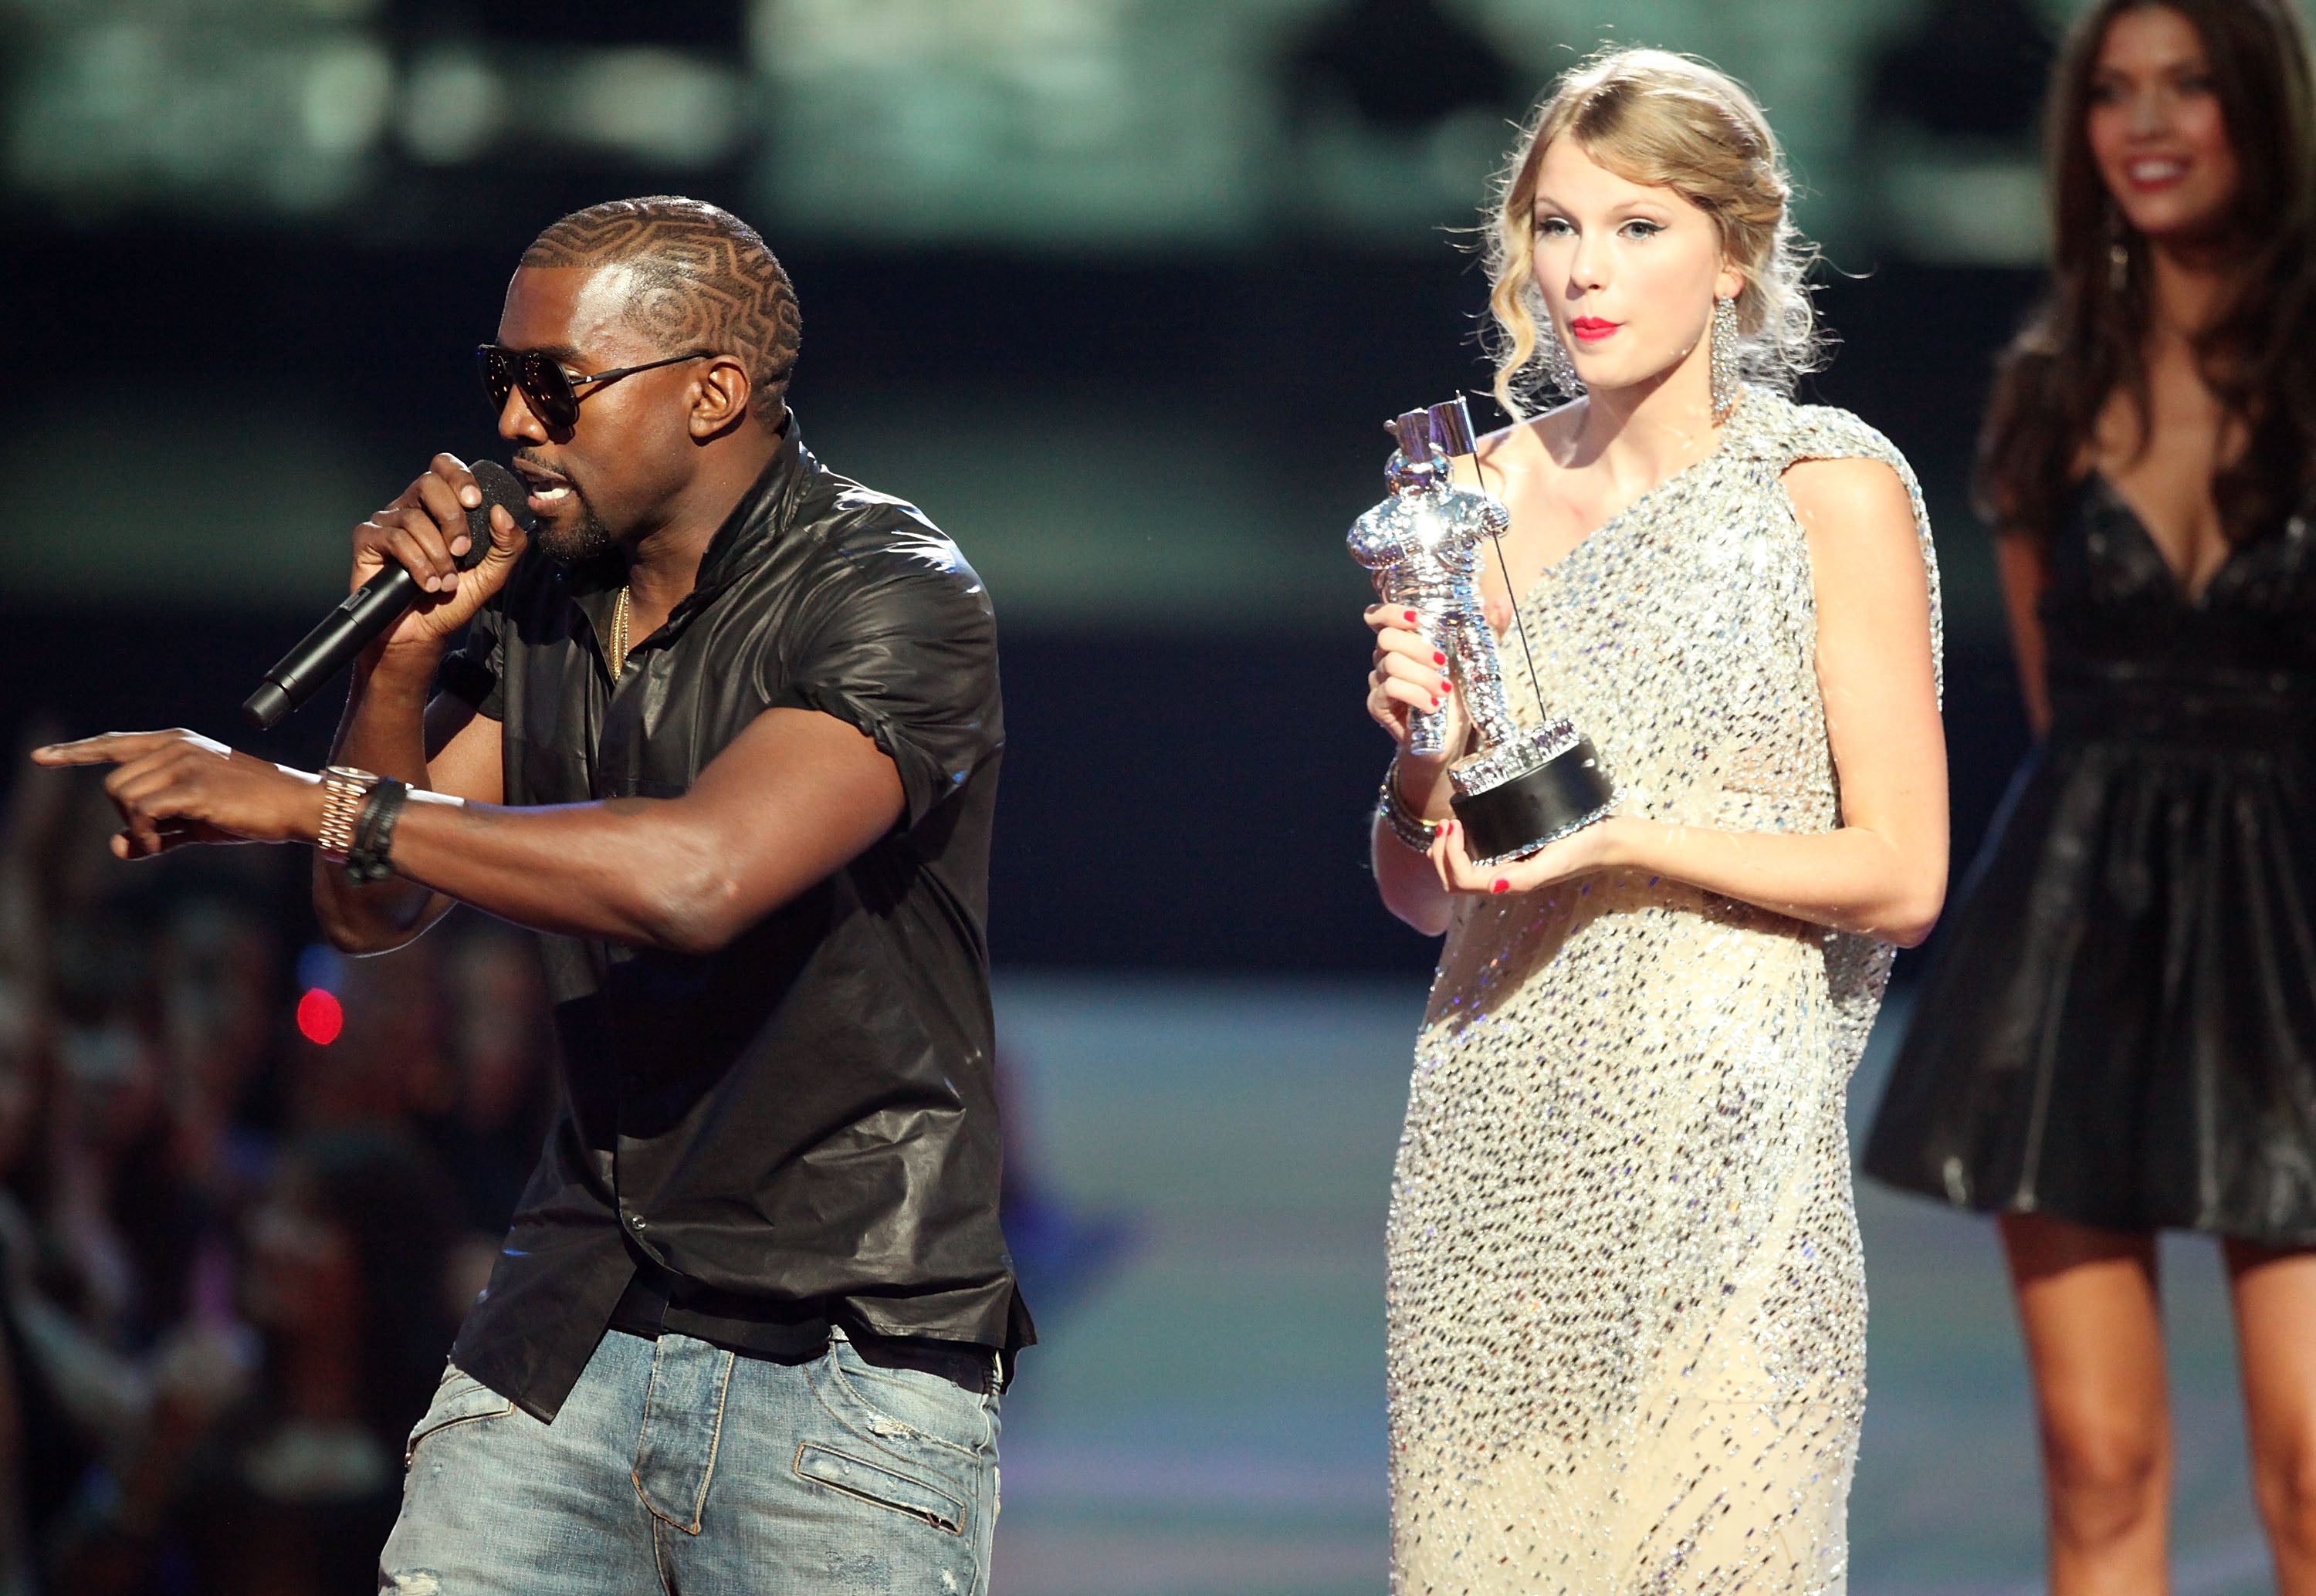 Kanye West infamously interrupts Taylor Swift at the 2009 MTV Video Music Awards